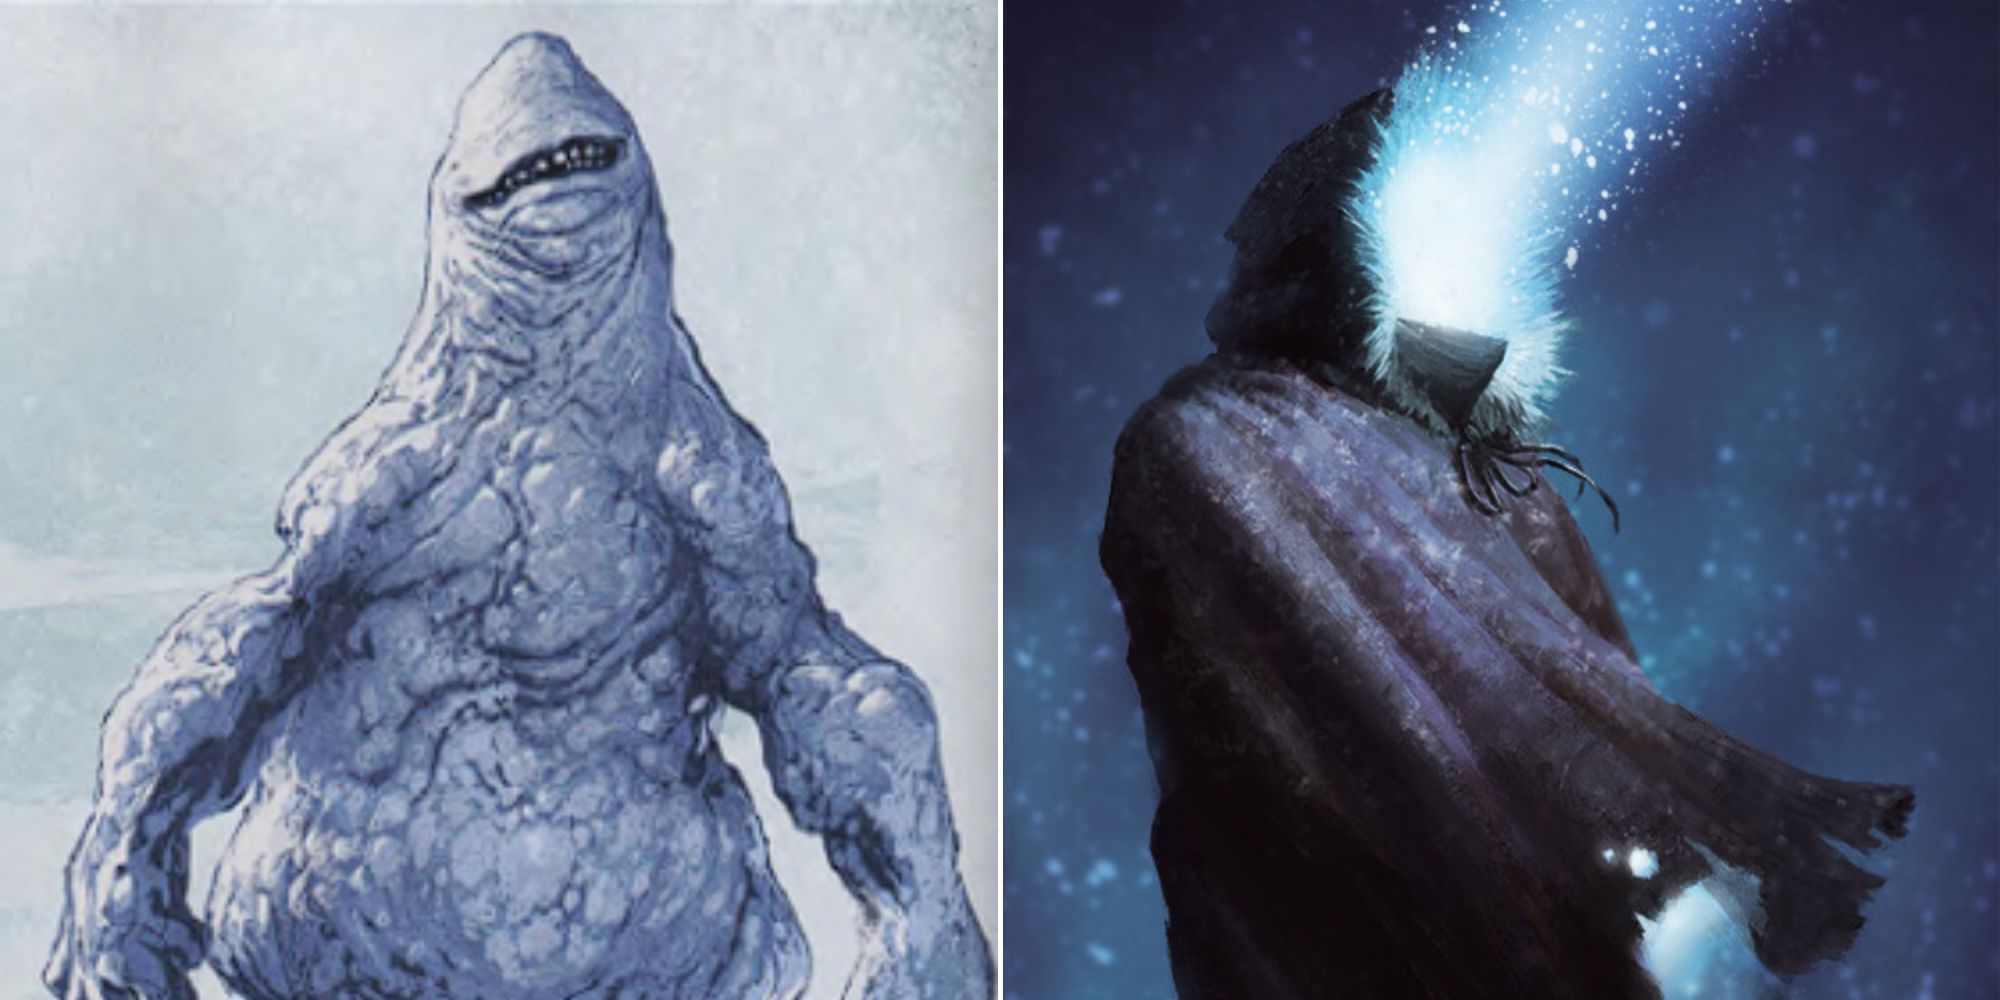 A Snow Golem with a sinister smile and a Coldlight walker shining light in the night in D&D